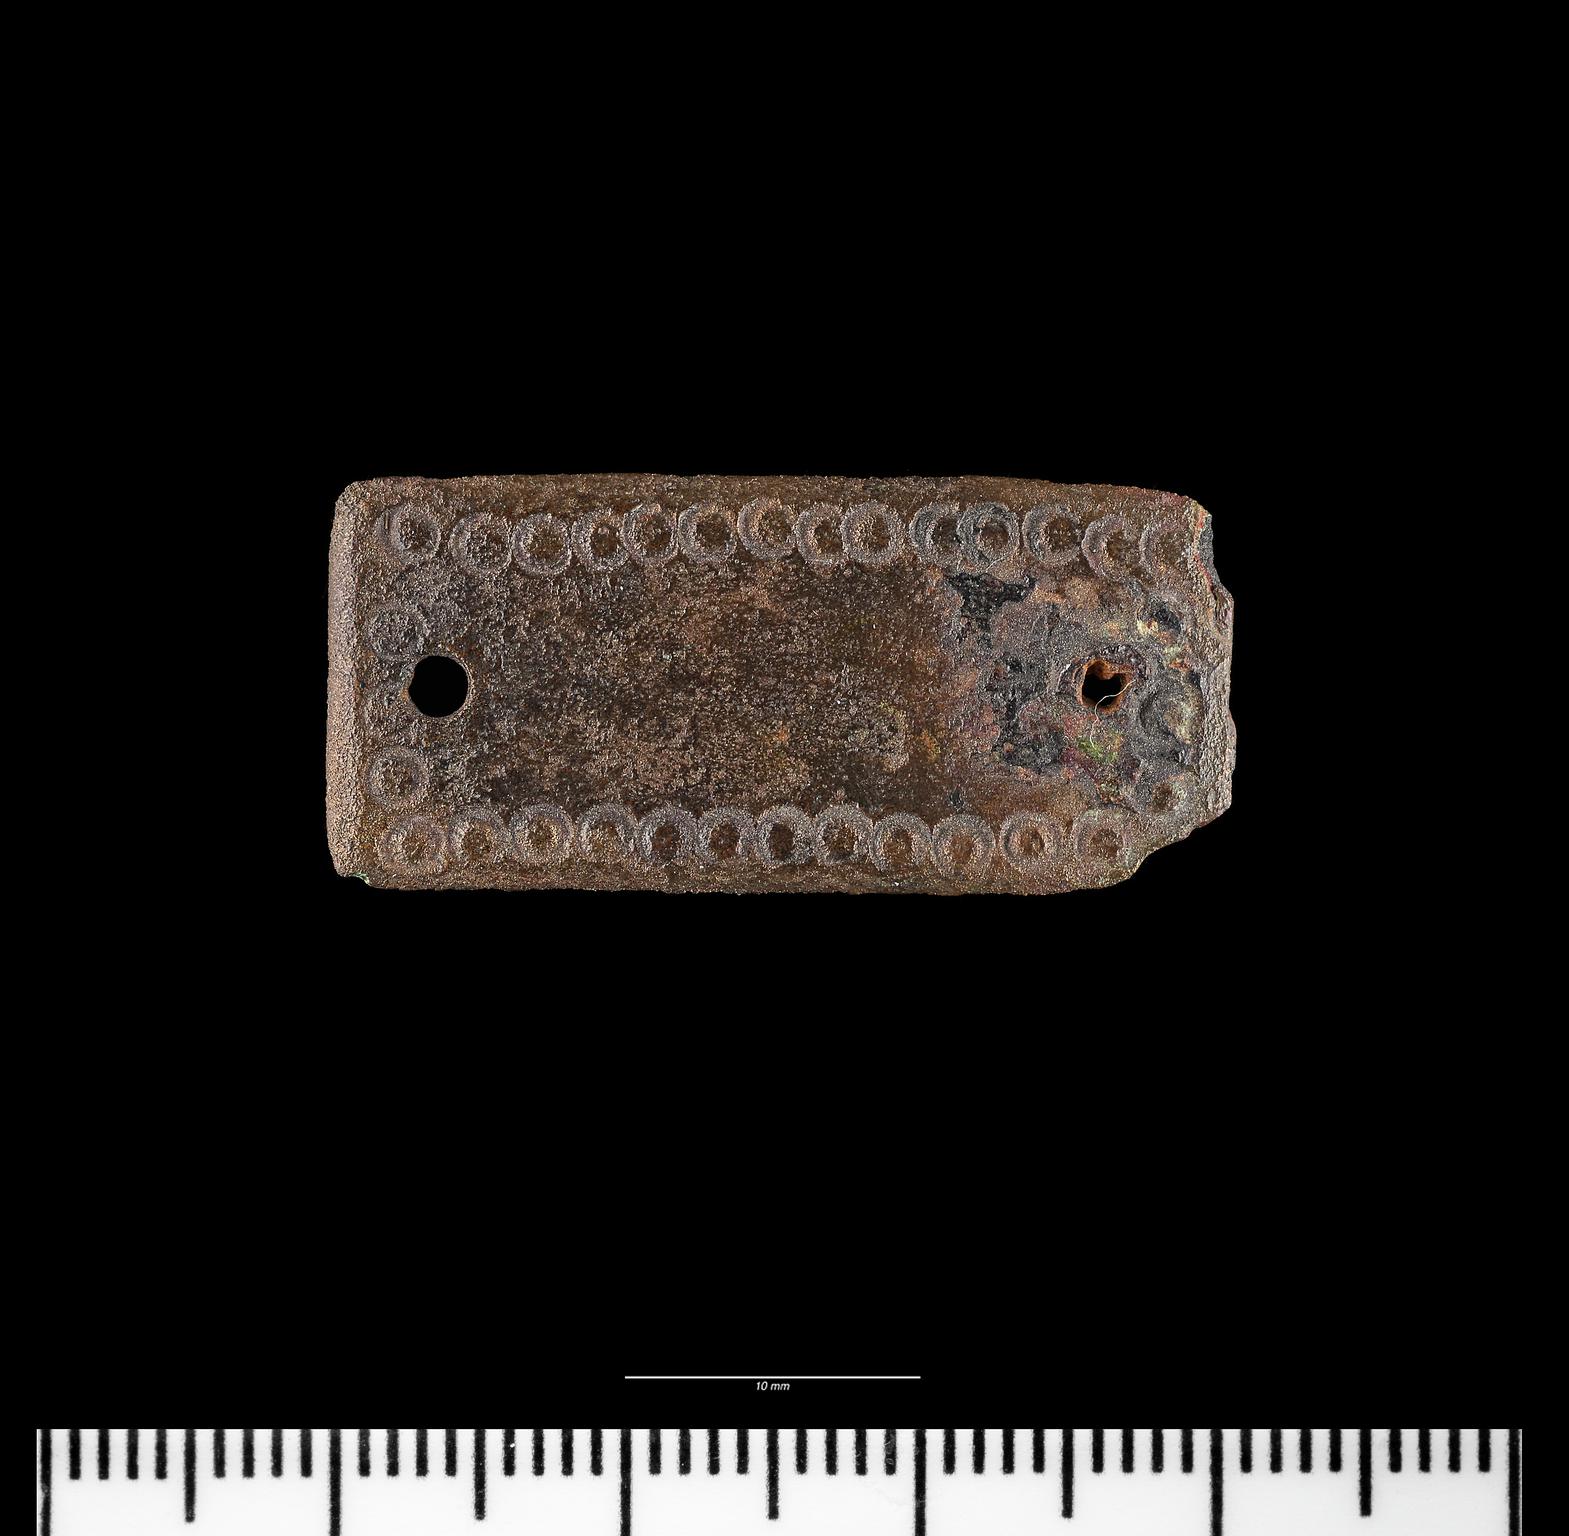 Early Medieval copper alloy belt / strap fitting